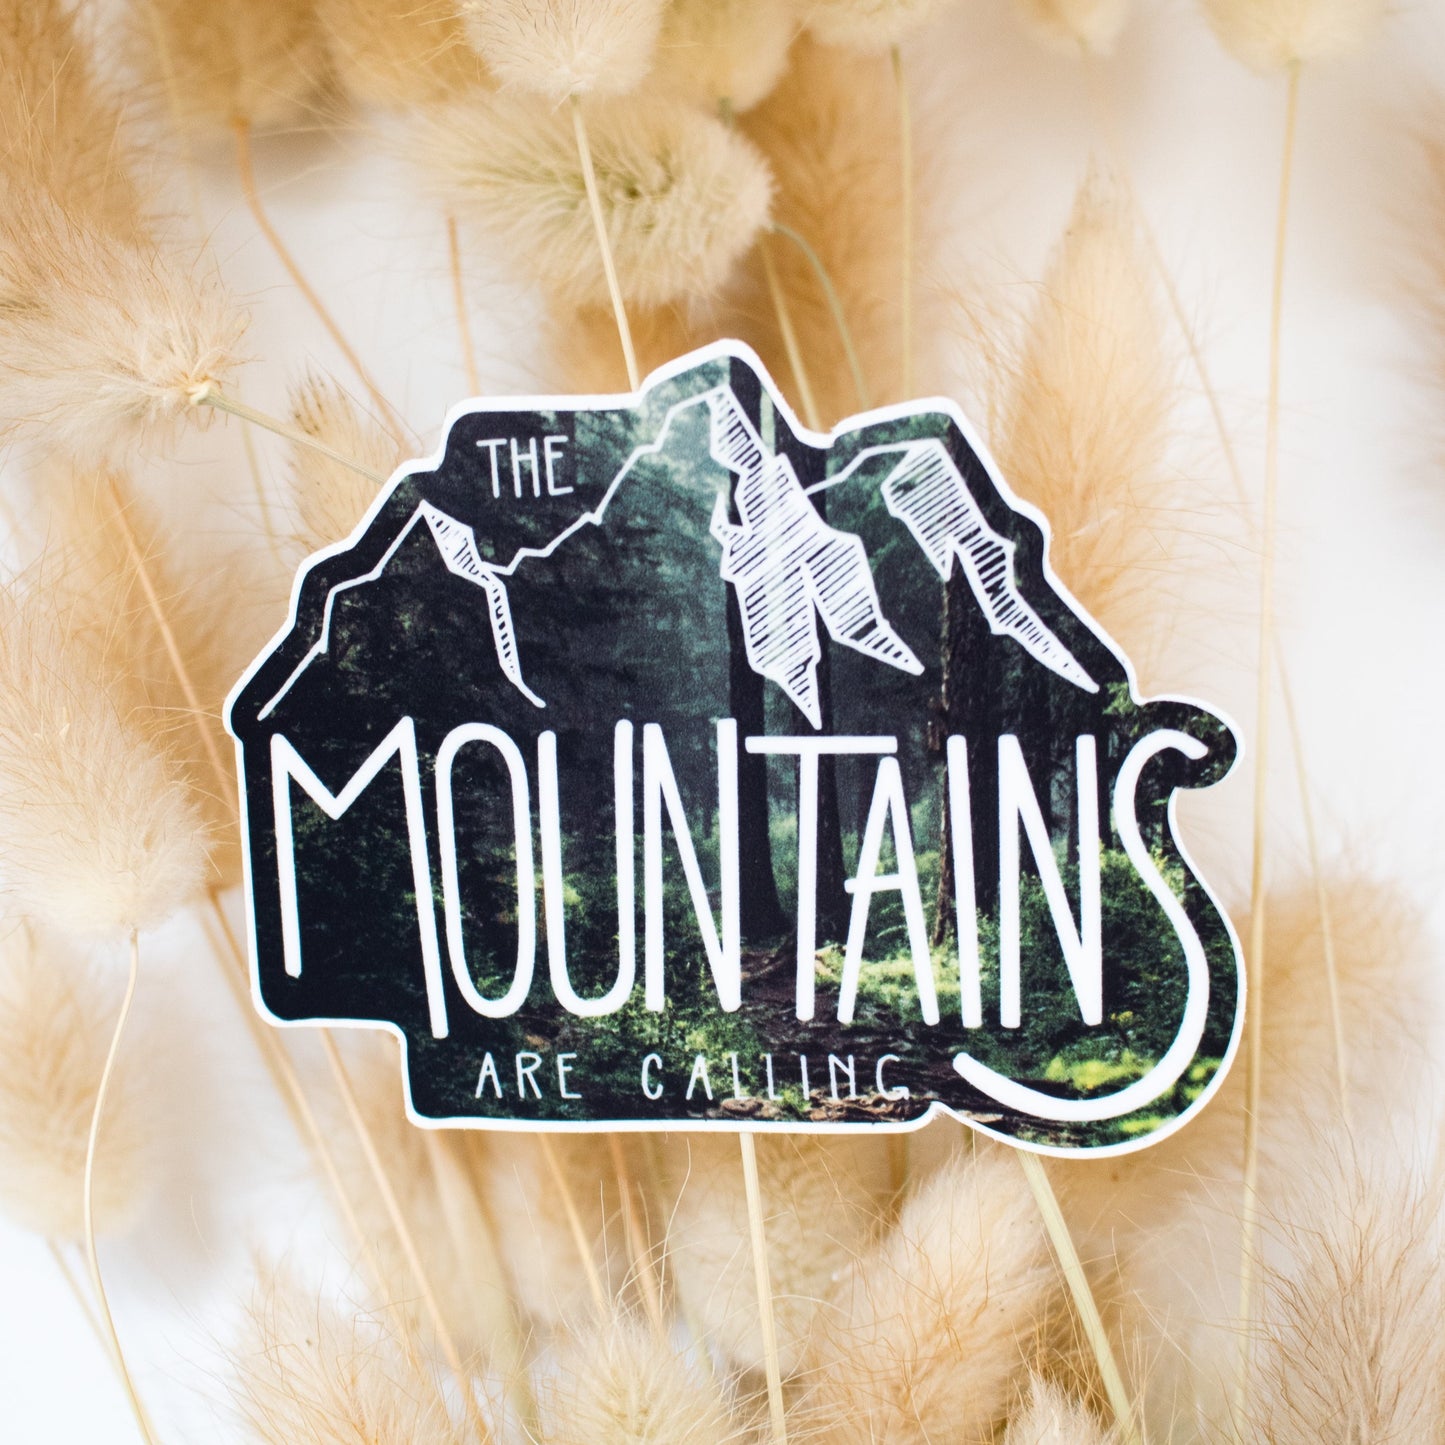 The mountains are calling quote